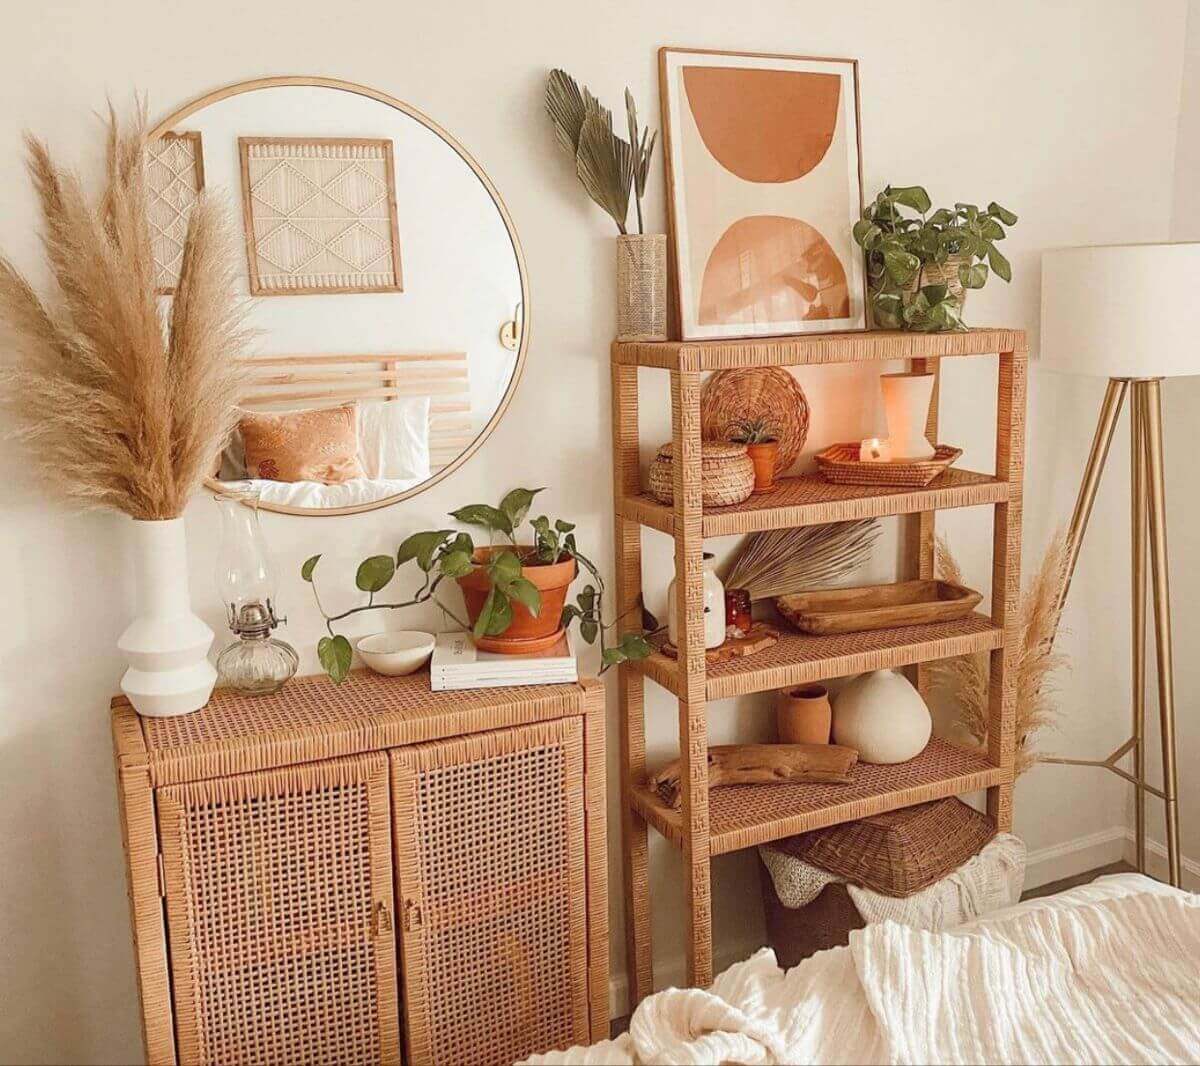 Transform Your Cupboard into a Bohemian Oasis with These DIY Ideas ...